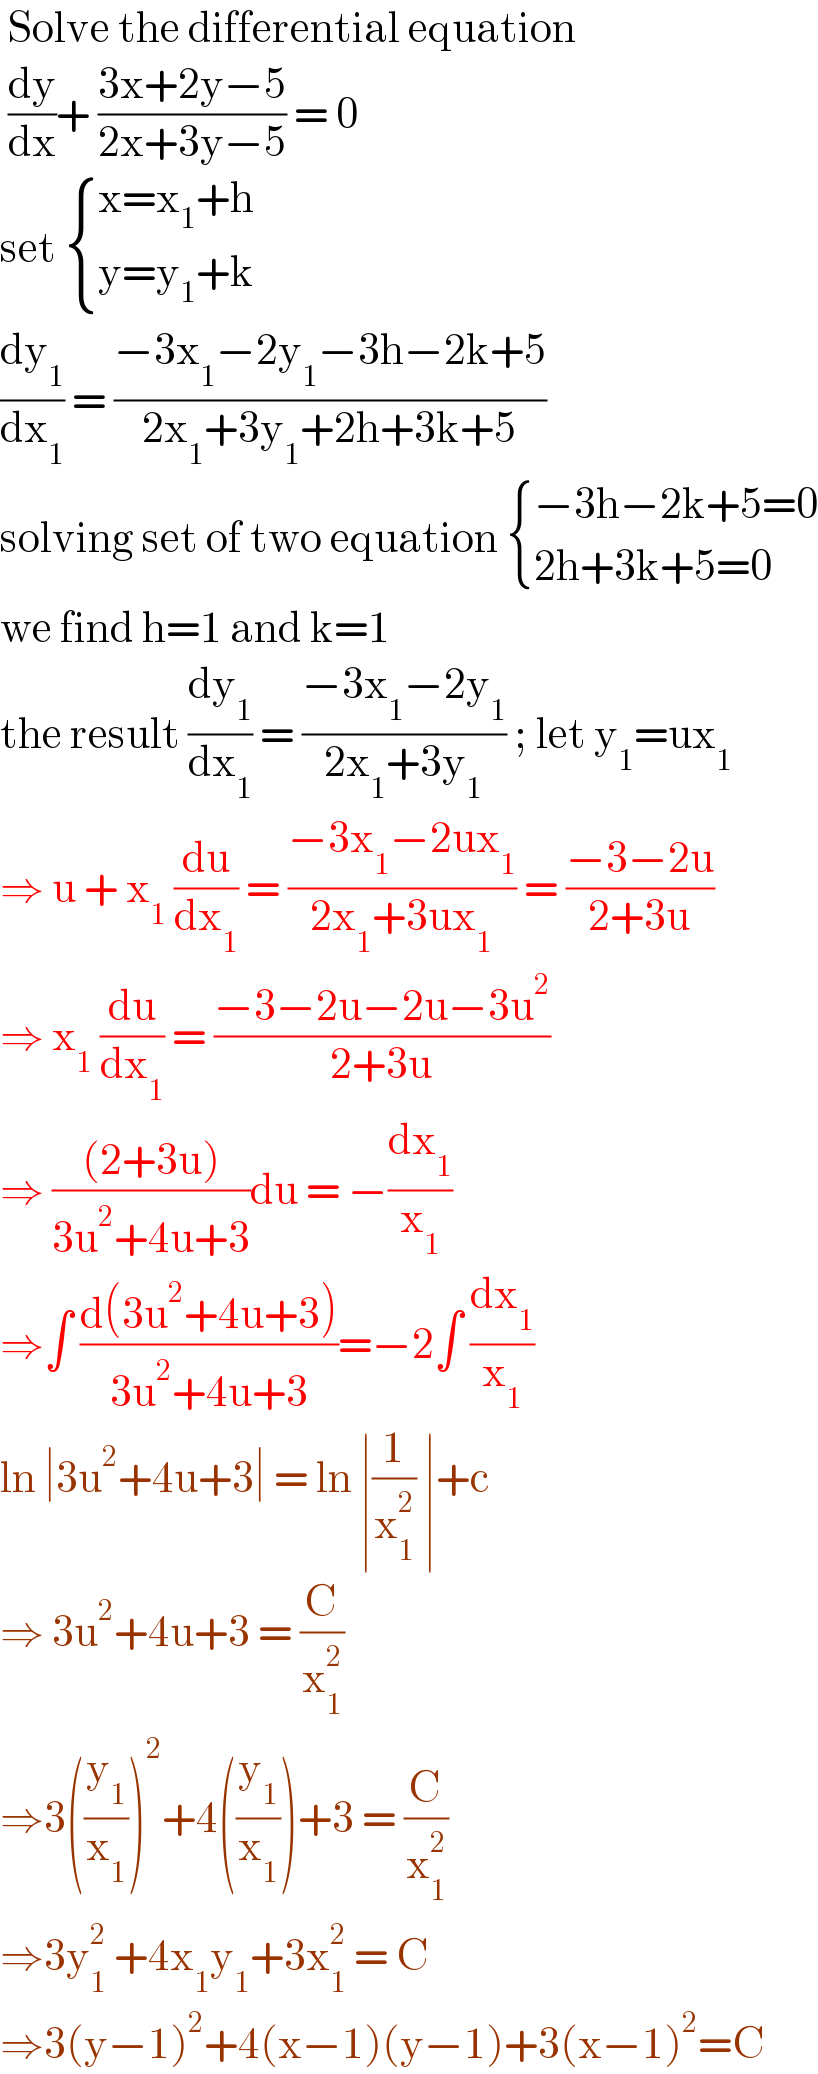  Solve the differential equation    (dy/dx)+ ((3x+2y−5)/(2x+3y−5)) = 0   set  { ((x=x_1 +h)),((y=y_1 +k)) :}  (dy_1 /dx_1 ) = ((−3x_1 −2y_1 −3h−2k+5)/(2x_1 +3y_1 +2h+3k+5))  solving set of two equation  { ((−3h−2k+5=0)),((2h+3k+5=0)) :}  we find h=1 and k=1   the result (dy_1 /dx_1 ) = ((−3x_1 −2y_1 )/(2x_1 +3y_1 )) ; let y_1 =ux_1   ⇒ u + x_1  (du/dx_1 ) = ((−3x_1 −2ux_1 )/(2x_1 +3ux_1 )) = ((−3−2u)/(2+3u))  ⇒ x_1  (du/dx_1 ) = ((−3−2u−2u−3u^2 )/(2+3u))  ⇒ (((2+3u))/(3u^2 +4u+3))du = −(dx_1 /x_1 )  ⇒∫ ((d(3u^2 +4u+3))/(3u^2 +4u+3))=−2∫ (dx_1 /x_1 )  ln ∣3u^2 +4u+3∣ = ln ∣(1/x_1 ^2 ) ∣+c  ⇒ 3u^2 +4u+3 = (C/x_1 ^2 )  ⇒3((y_1 /x_1 ))^2 +4((y_1 /x_1 ))+3 = (C/x_1 ^2 )  ⇒3y_1 ^2  +4x_1 y_1 +3x_1 ^2  = C  ⇒3(y−1)^2 +4(x−1)(y−1)+3(x−1)^2 =C  